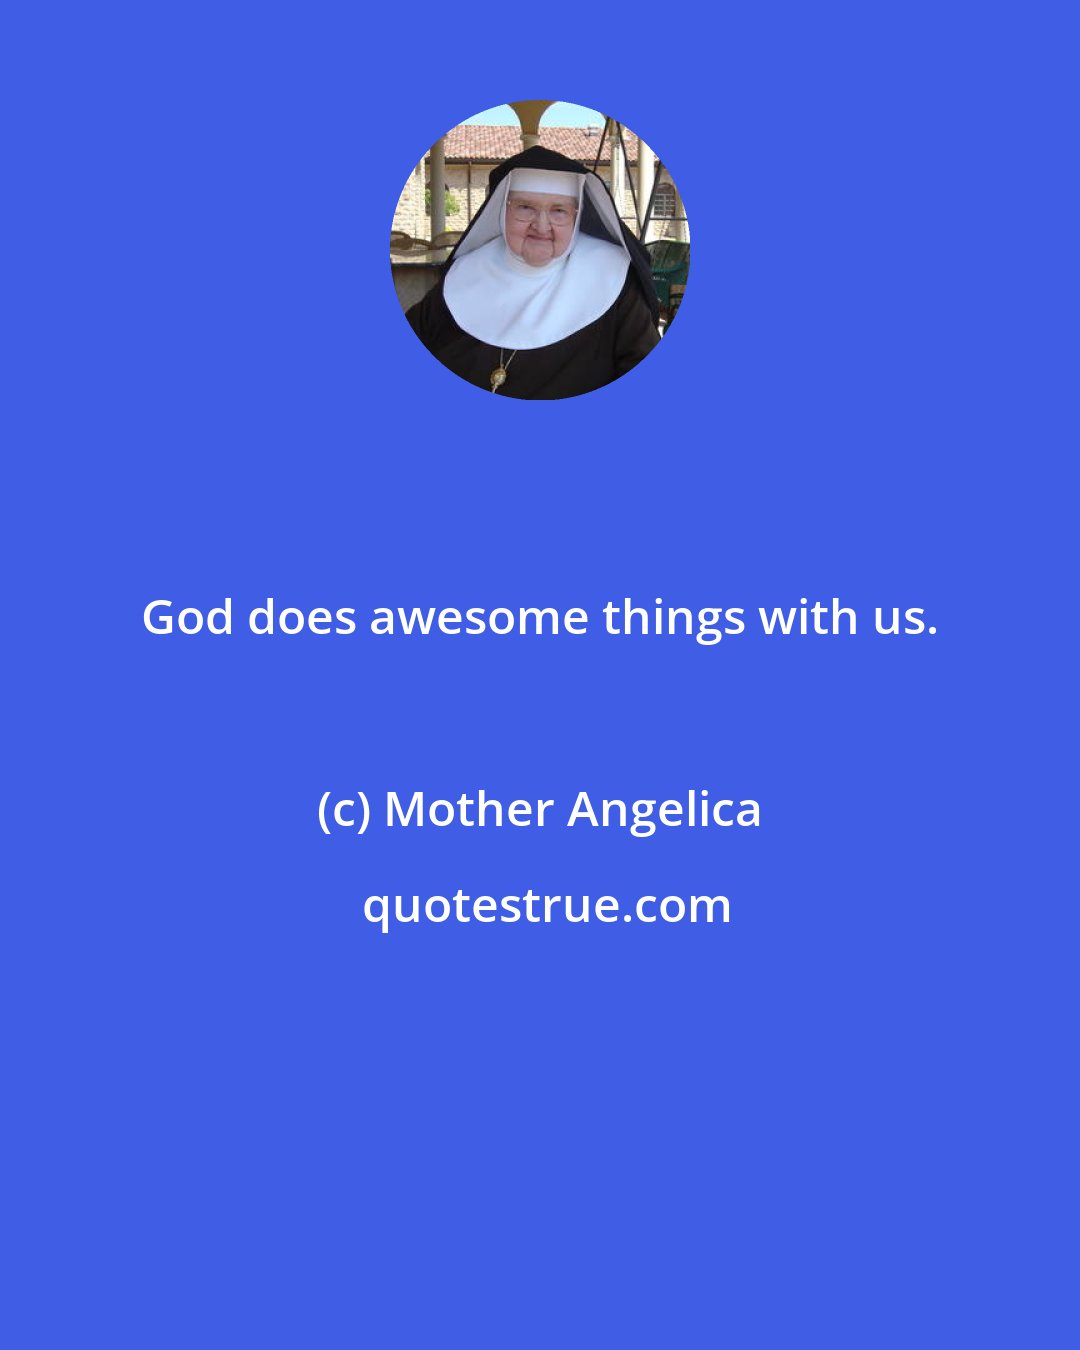 Mother Angelica: God does awesome things with us.